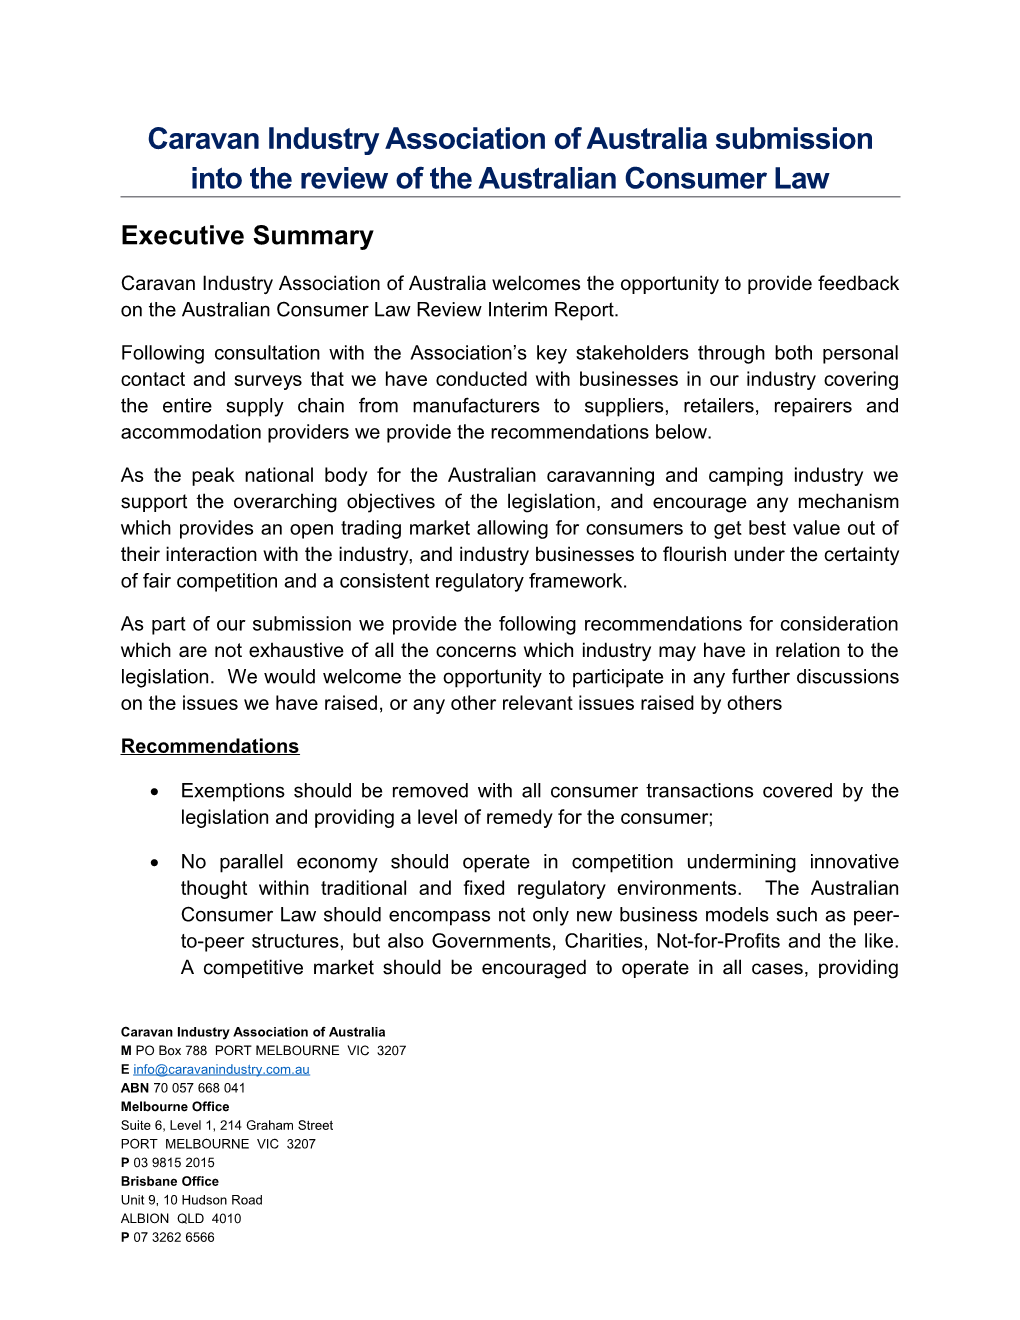 Caravan Industry Association of Australia Ltd - Submission to ACL Review Interim Report